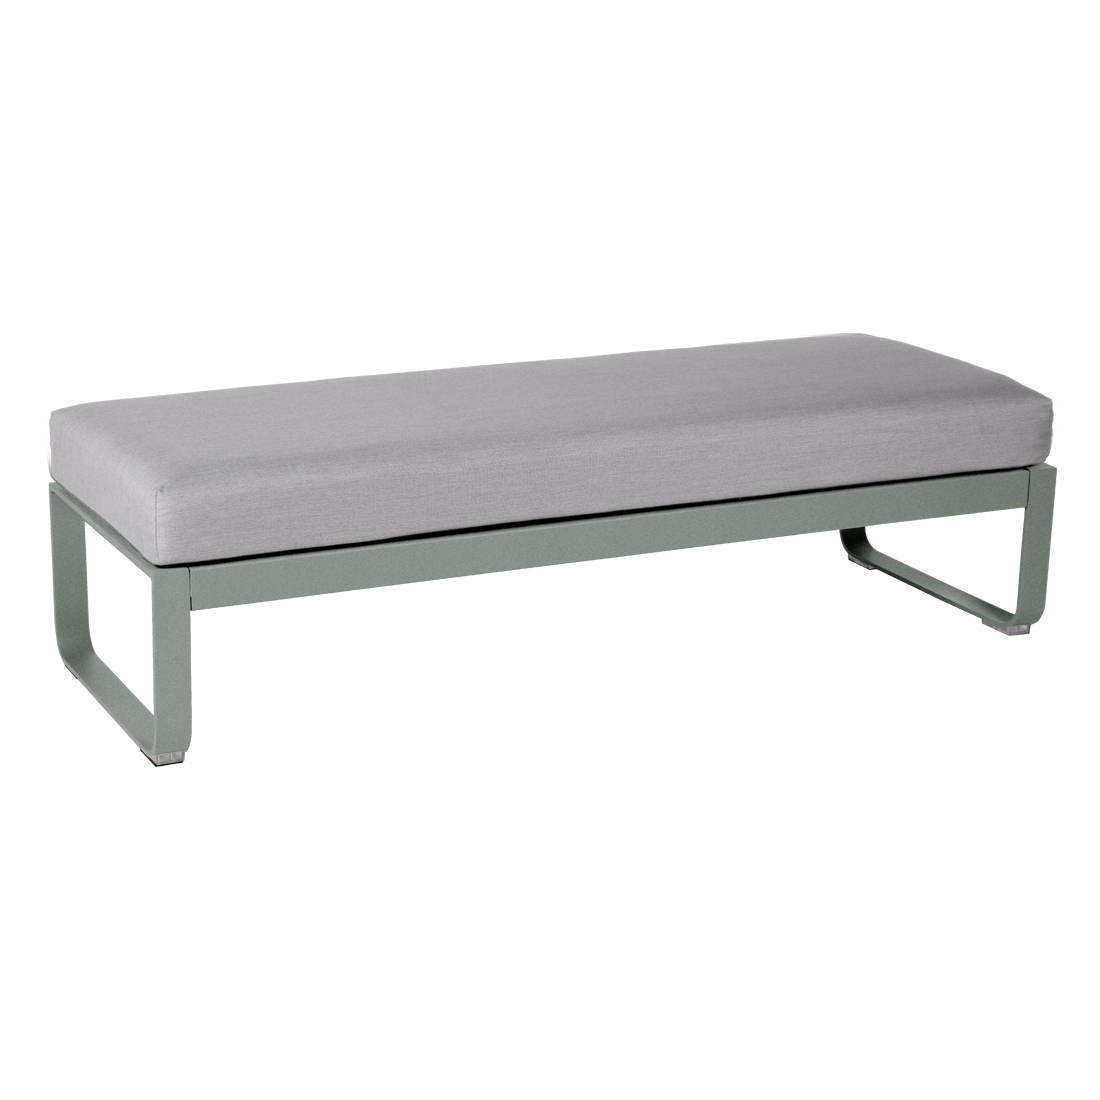 BELLEVIE bench with upholstery